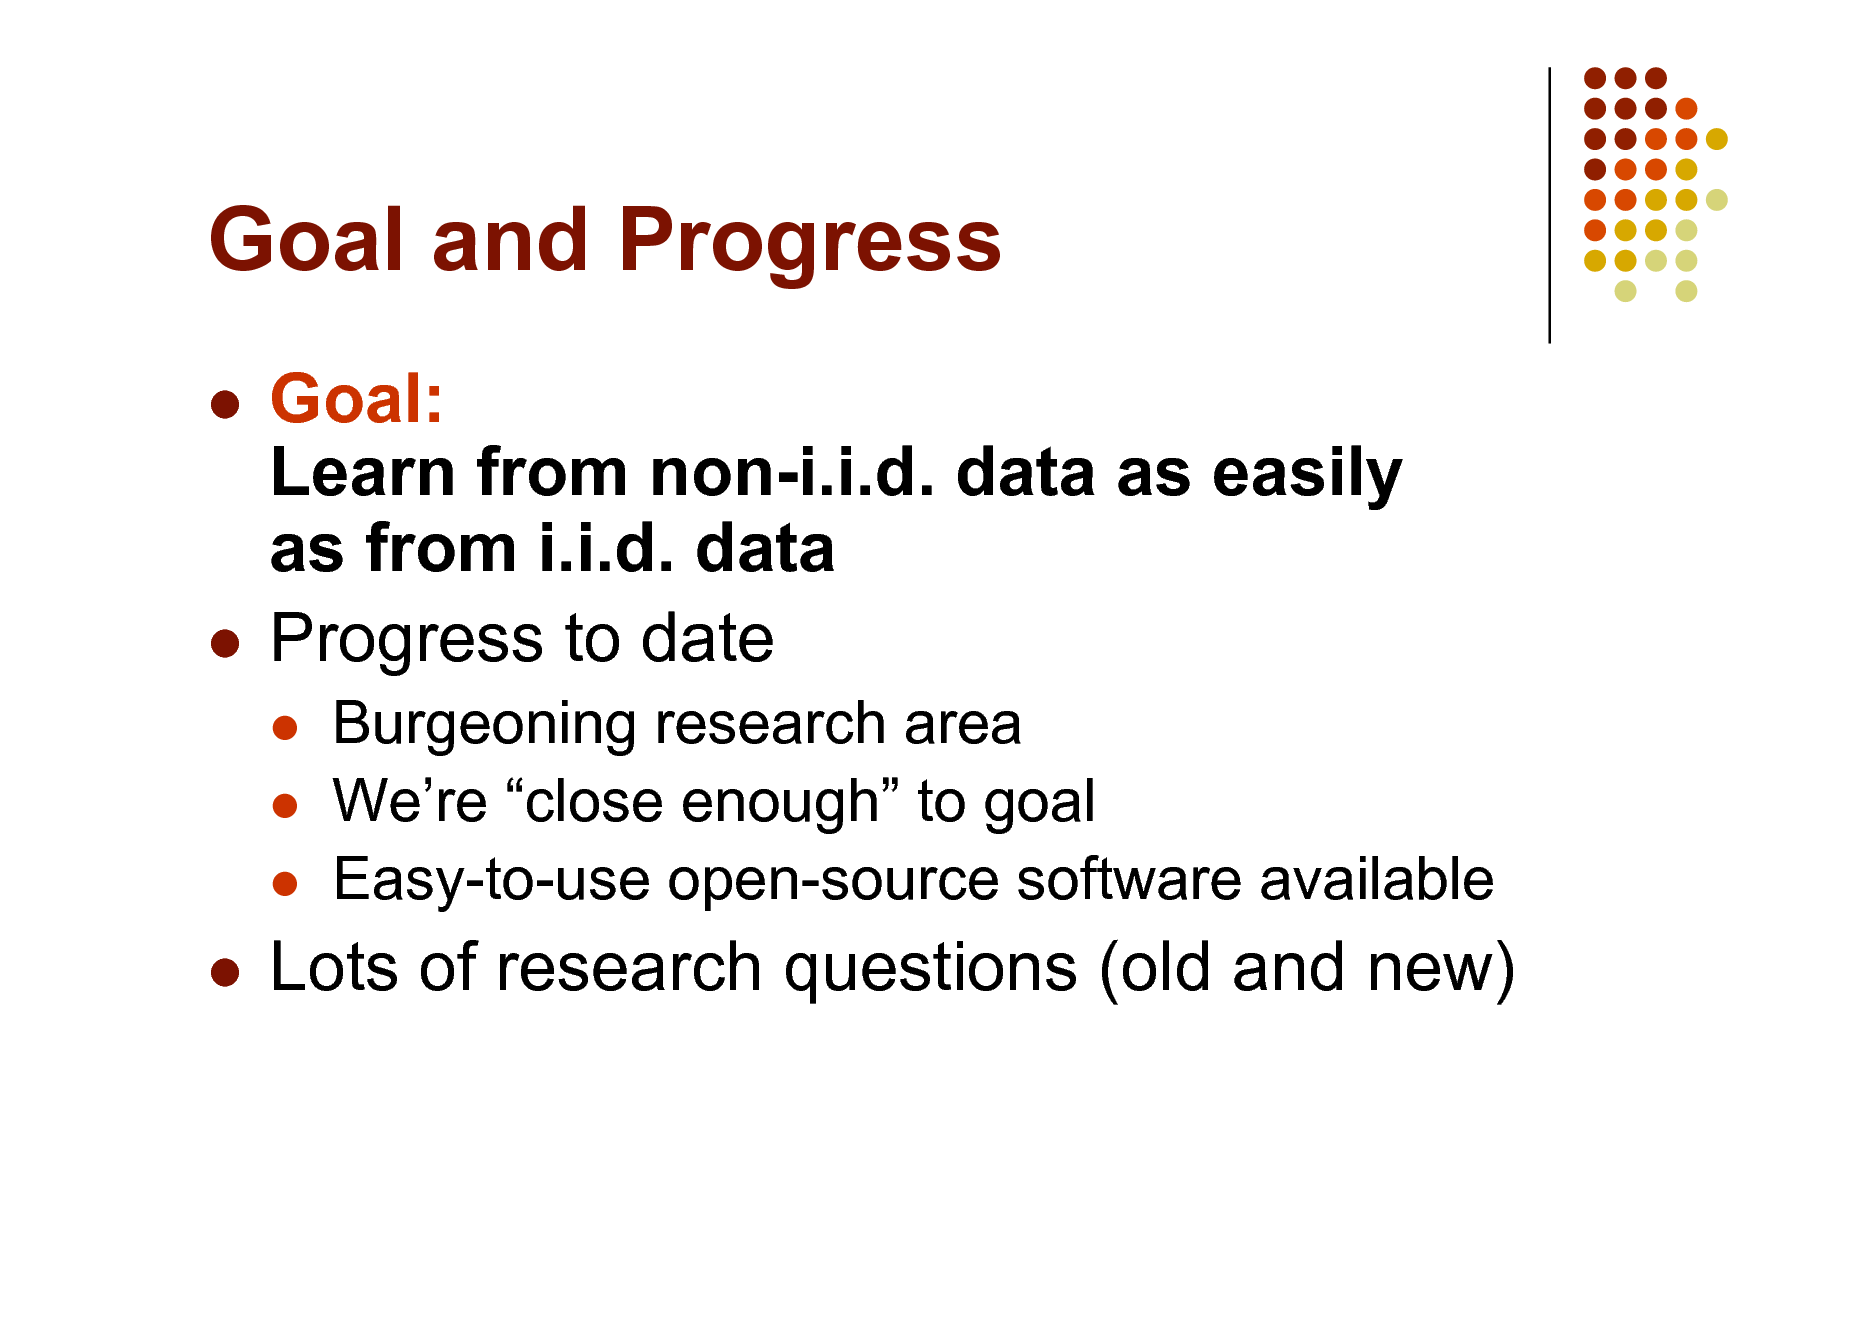 Slide: Goal and Progress
Goal: Learn from non-i.i.d. data as easily as from i.i.d. data  Progress to date

  

Burgeoning research area Were close enough to goal Easy-to-use open-source software available



Lots of research questions (old and new)

